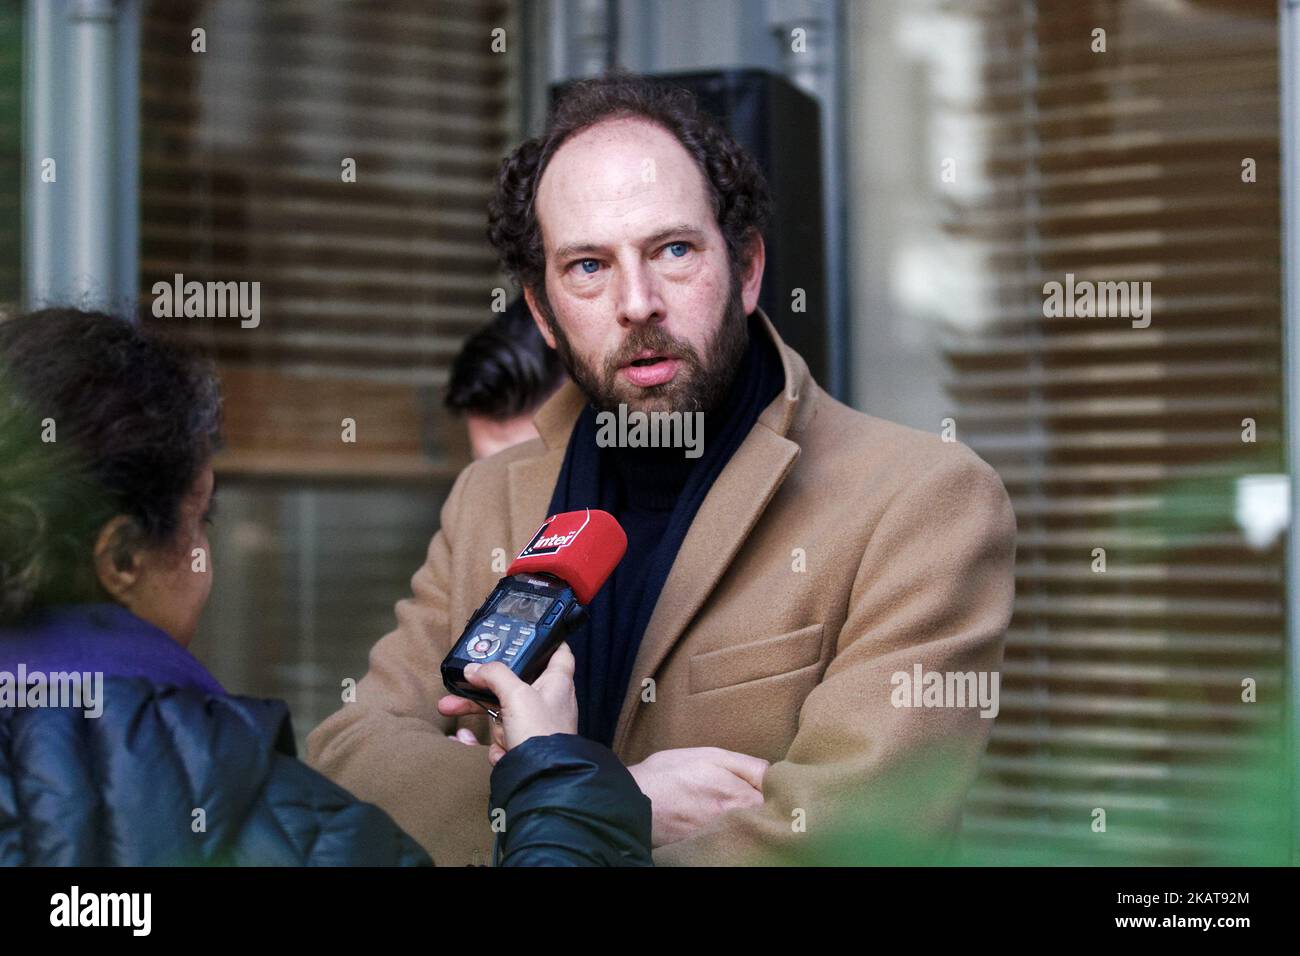 French writer Olivier Guez addresses the press at the restaurant Drouant in Paris, France on November 6, 2017. Olivier Guez wins the Renaudot prize for his novel ‘La Disparition de Josef Mengele’, or ‘The Disappearance of Josef Mengele’. The Renaudot prize while not officially related to the Prix Goncourt, is a kind of complement to it, announcing its laureate at the same time and place as the Prix Goncourt, namely on the first Tuesday of November at the Drouant restaurant in Paris. (Photo by Michel Stoupak/NurPhoto) Stock Photo